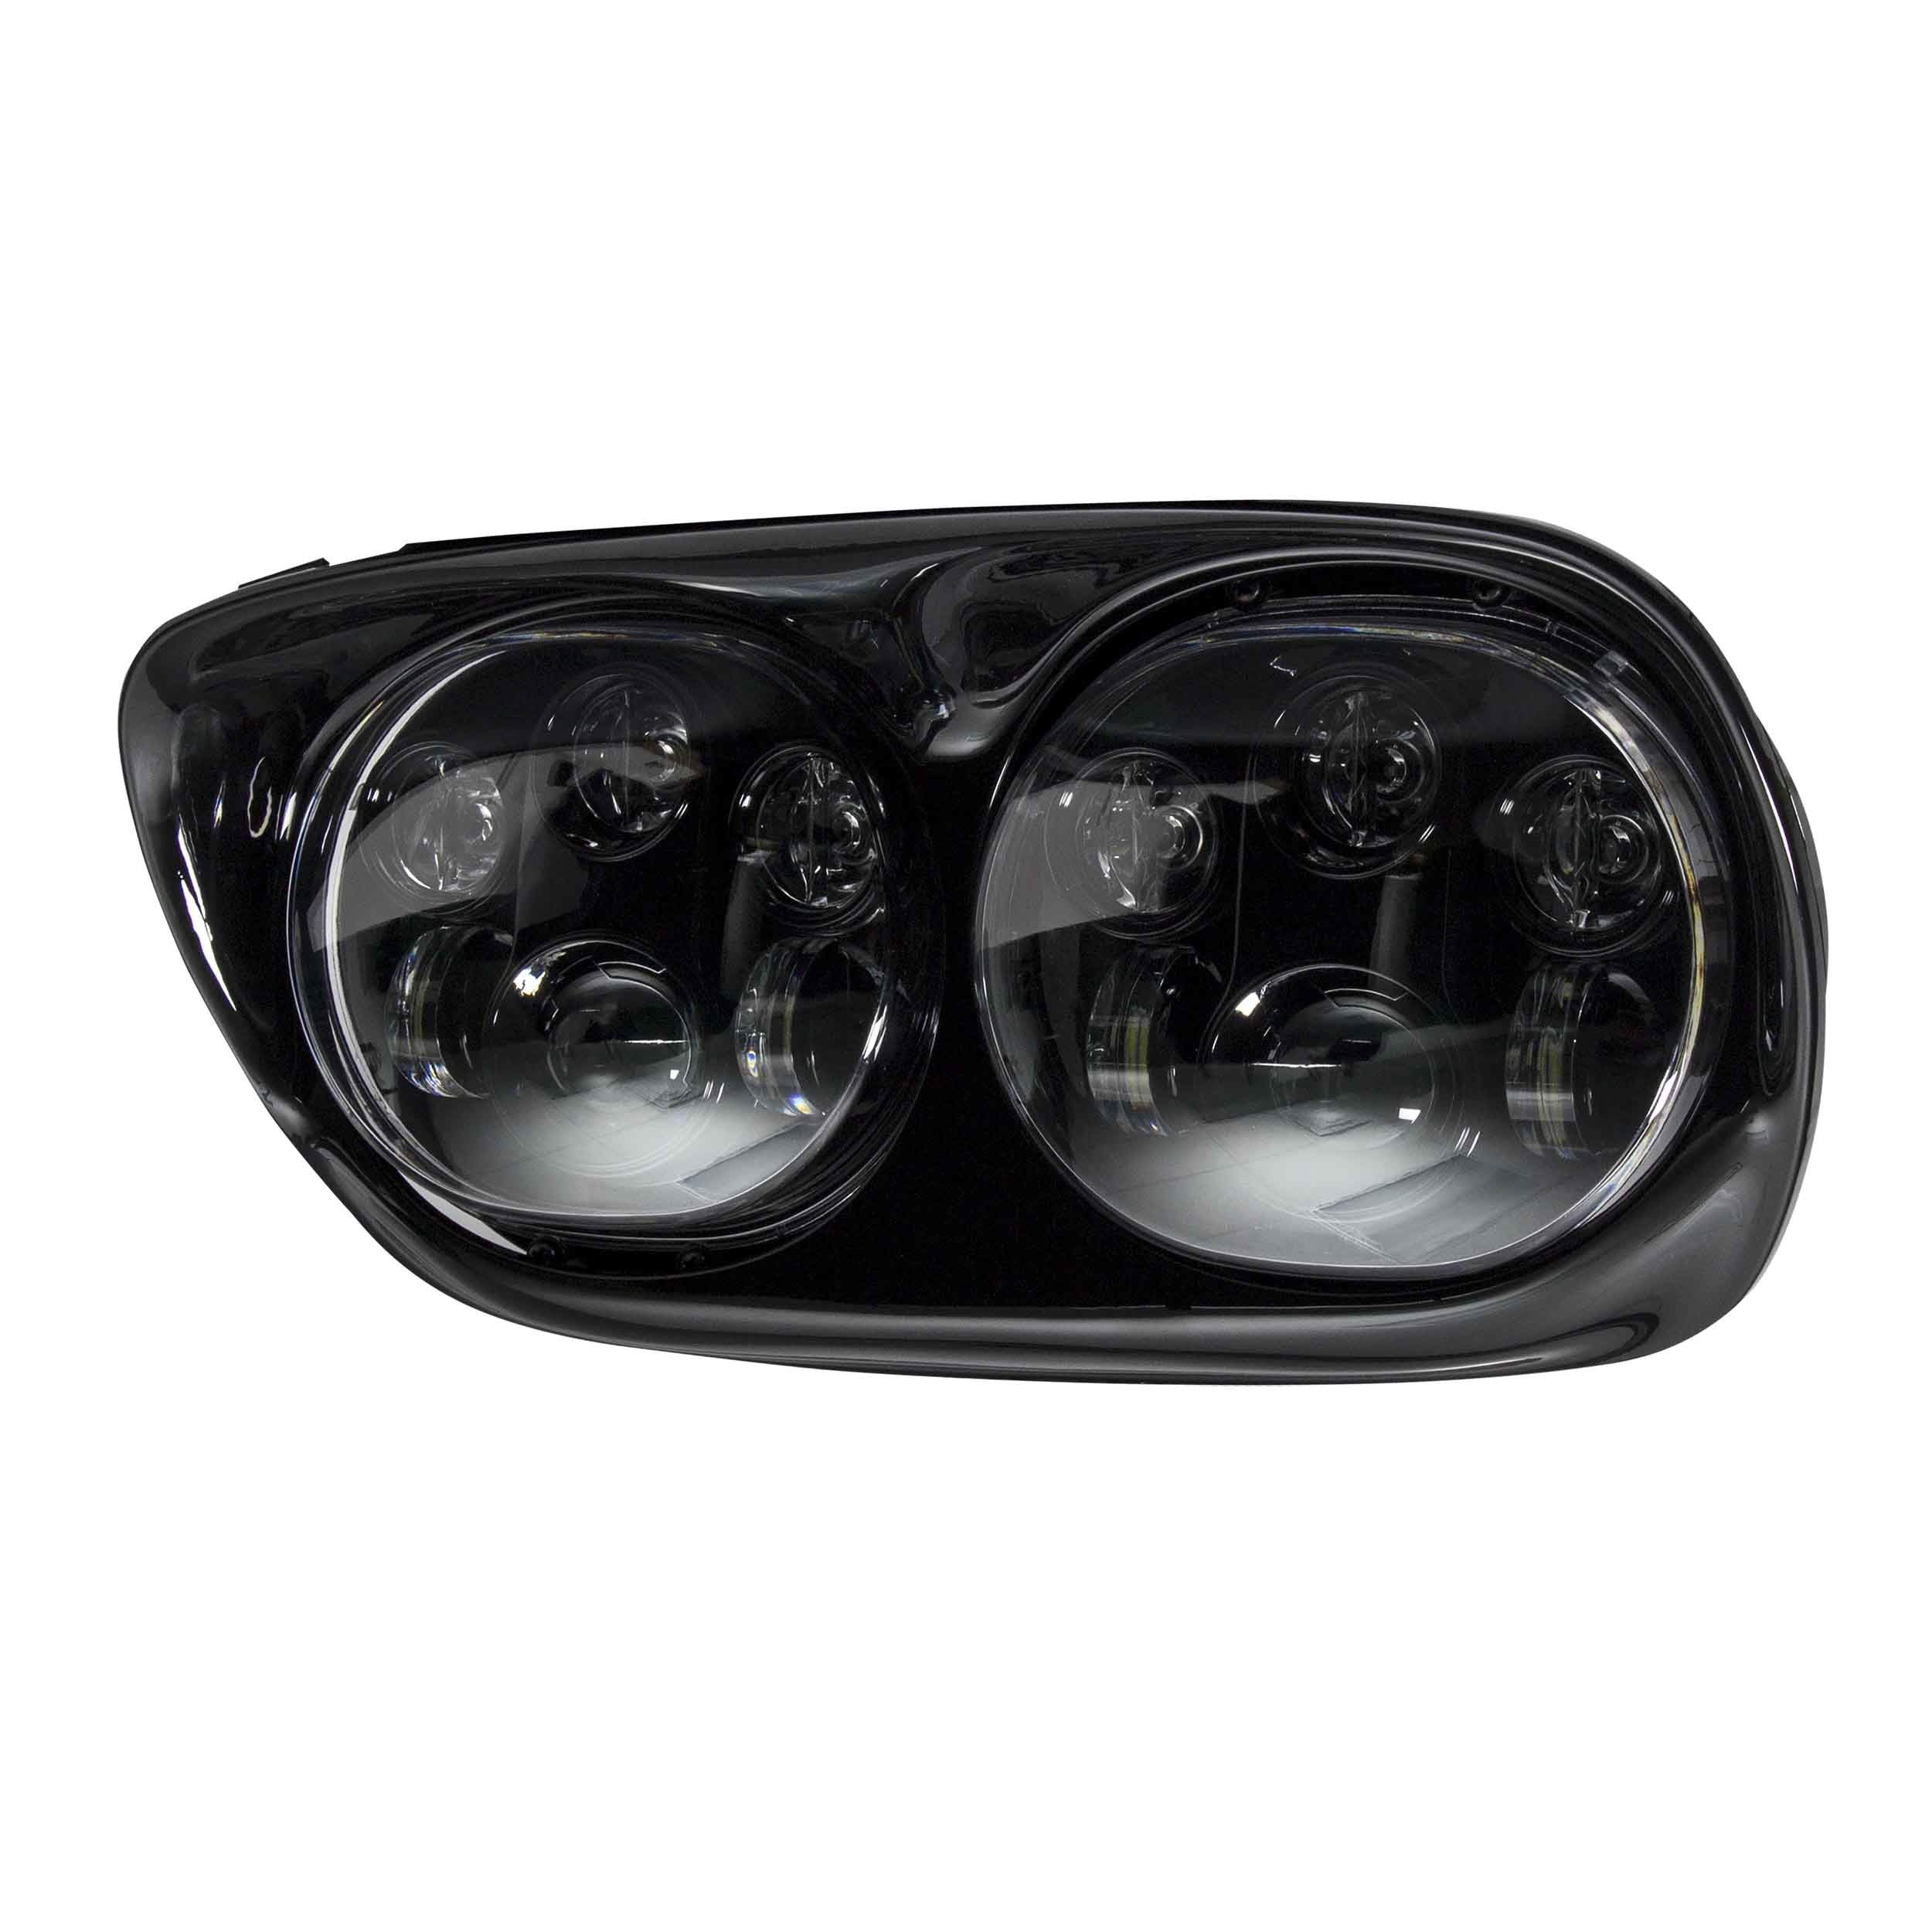 Saddle Tramp BC-RGHKB - Dual Round Motorcycle Headlights with Black Face - 5.6 Inch